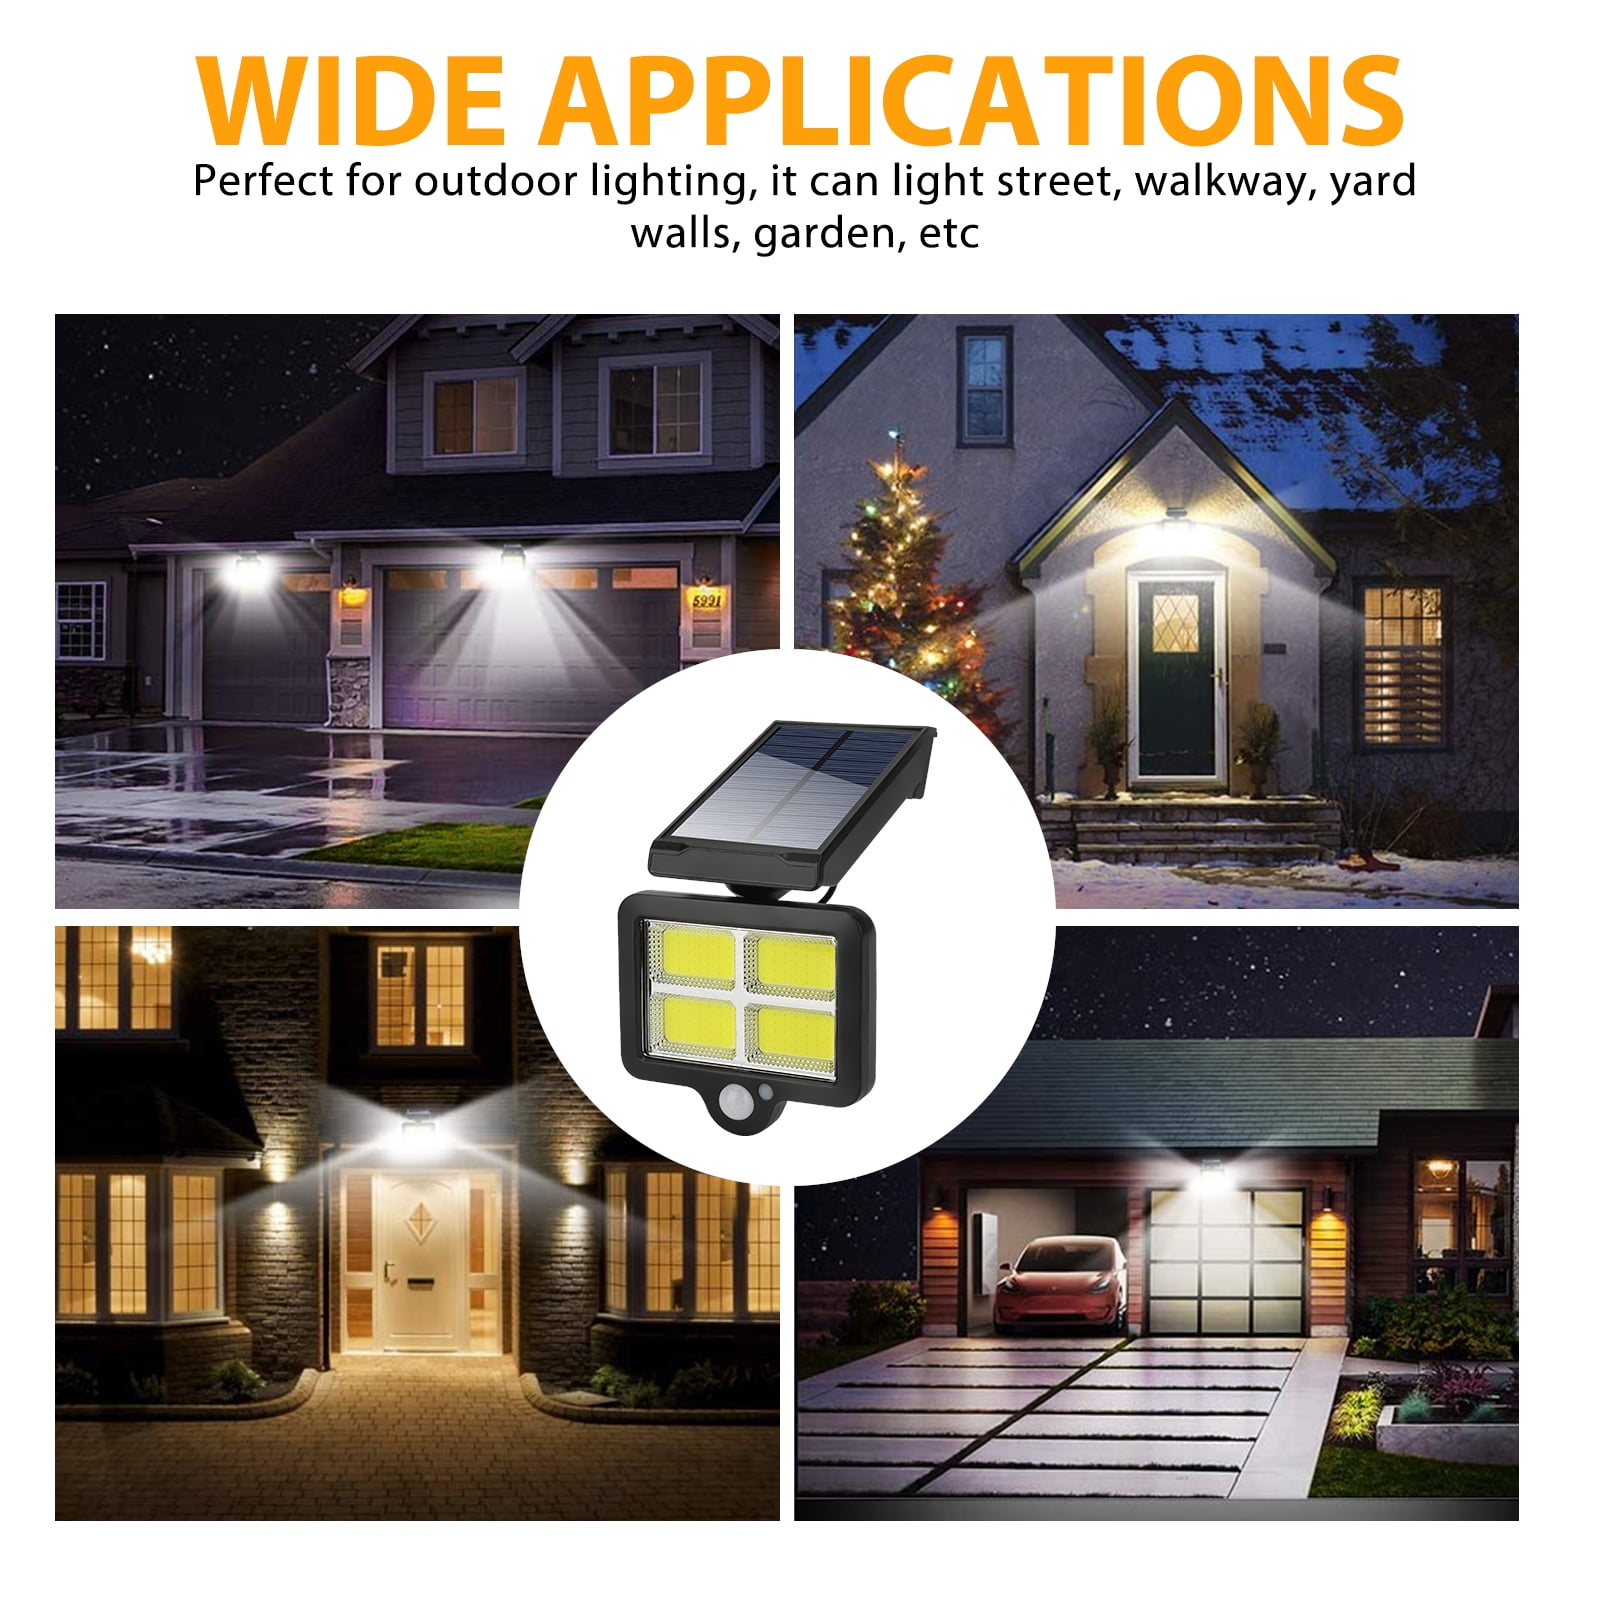 Waterproof Solar Wall Lights Wilko With Motion Sensor And 4 Modes For  Outdoor Garden Lighting 244/222 LED, Solar Powered Focos Solares From Leeu,  $5.28